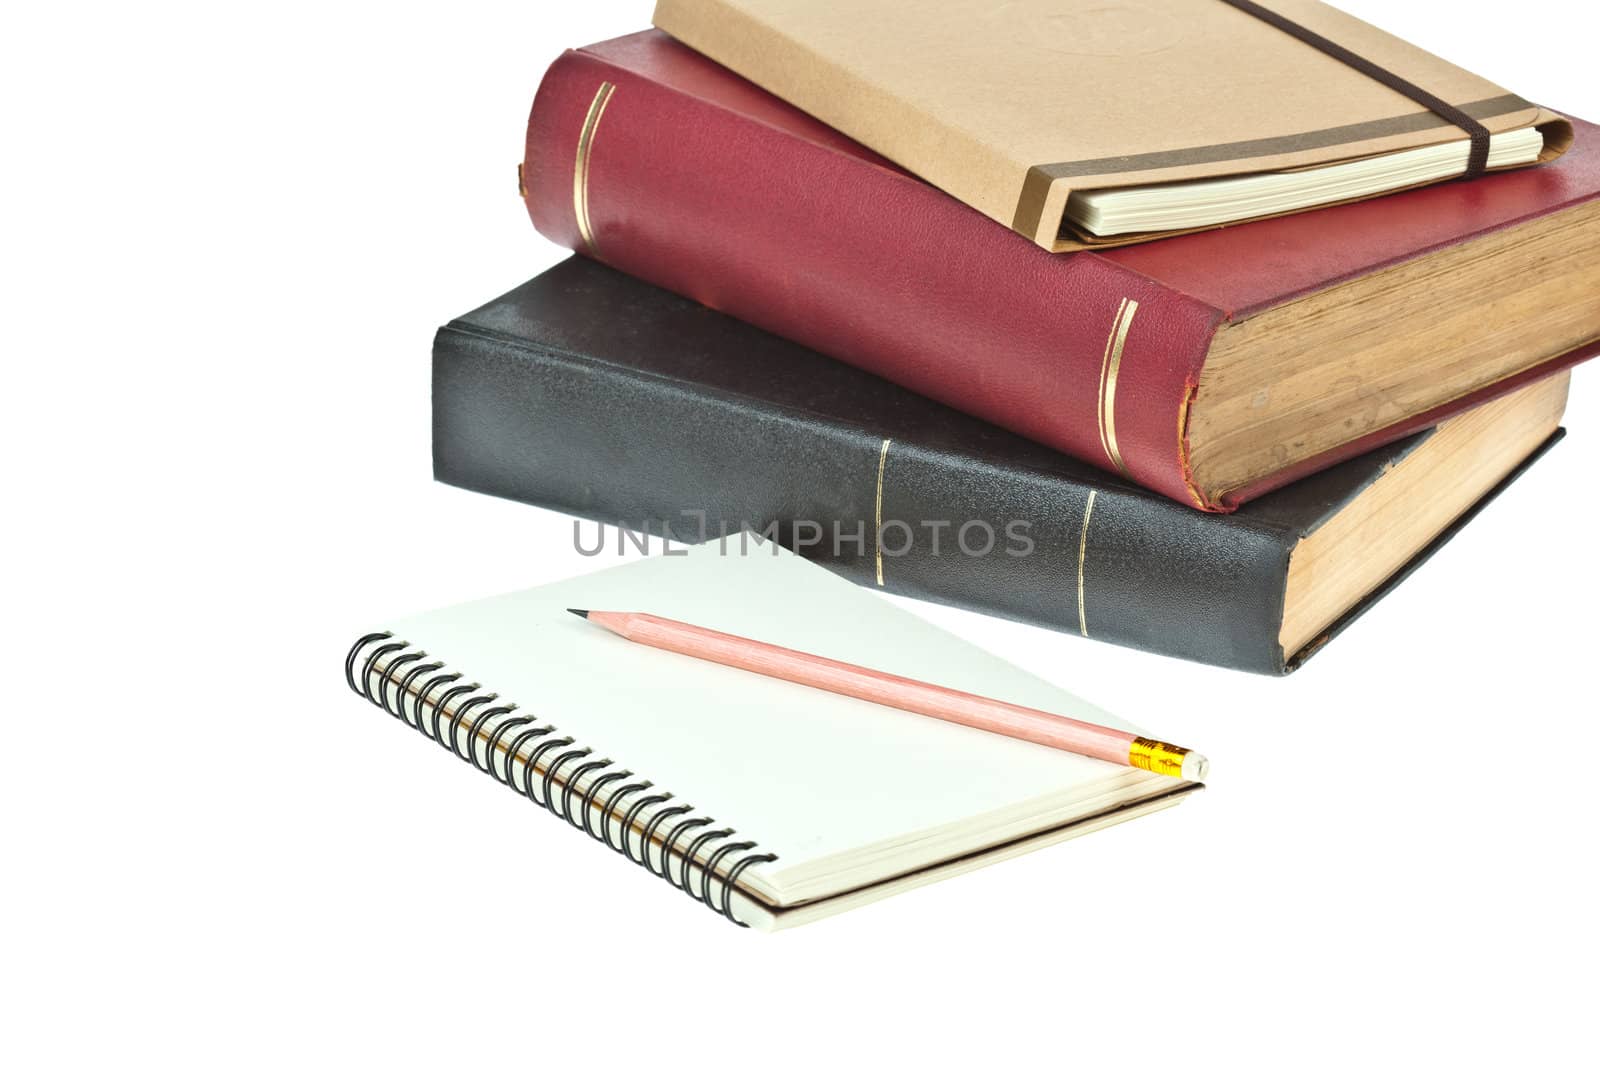 Pencil on, cream colored paper notebook and book as background